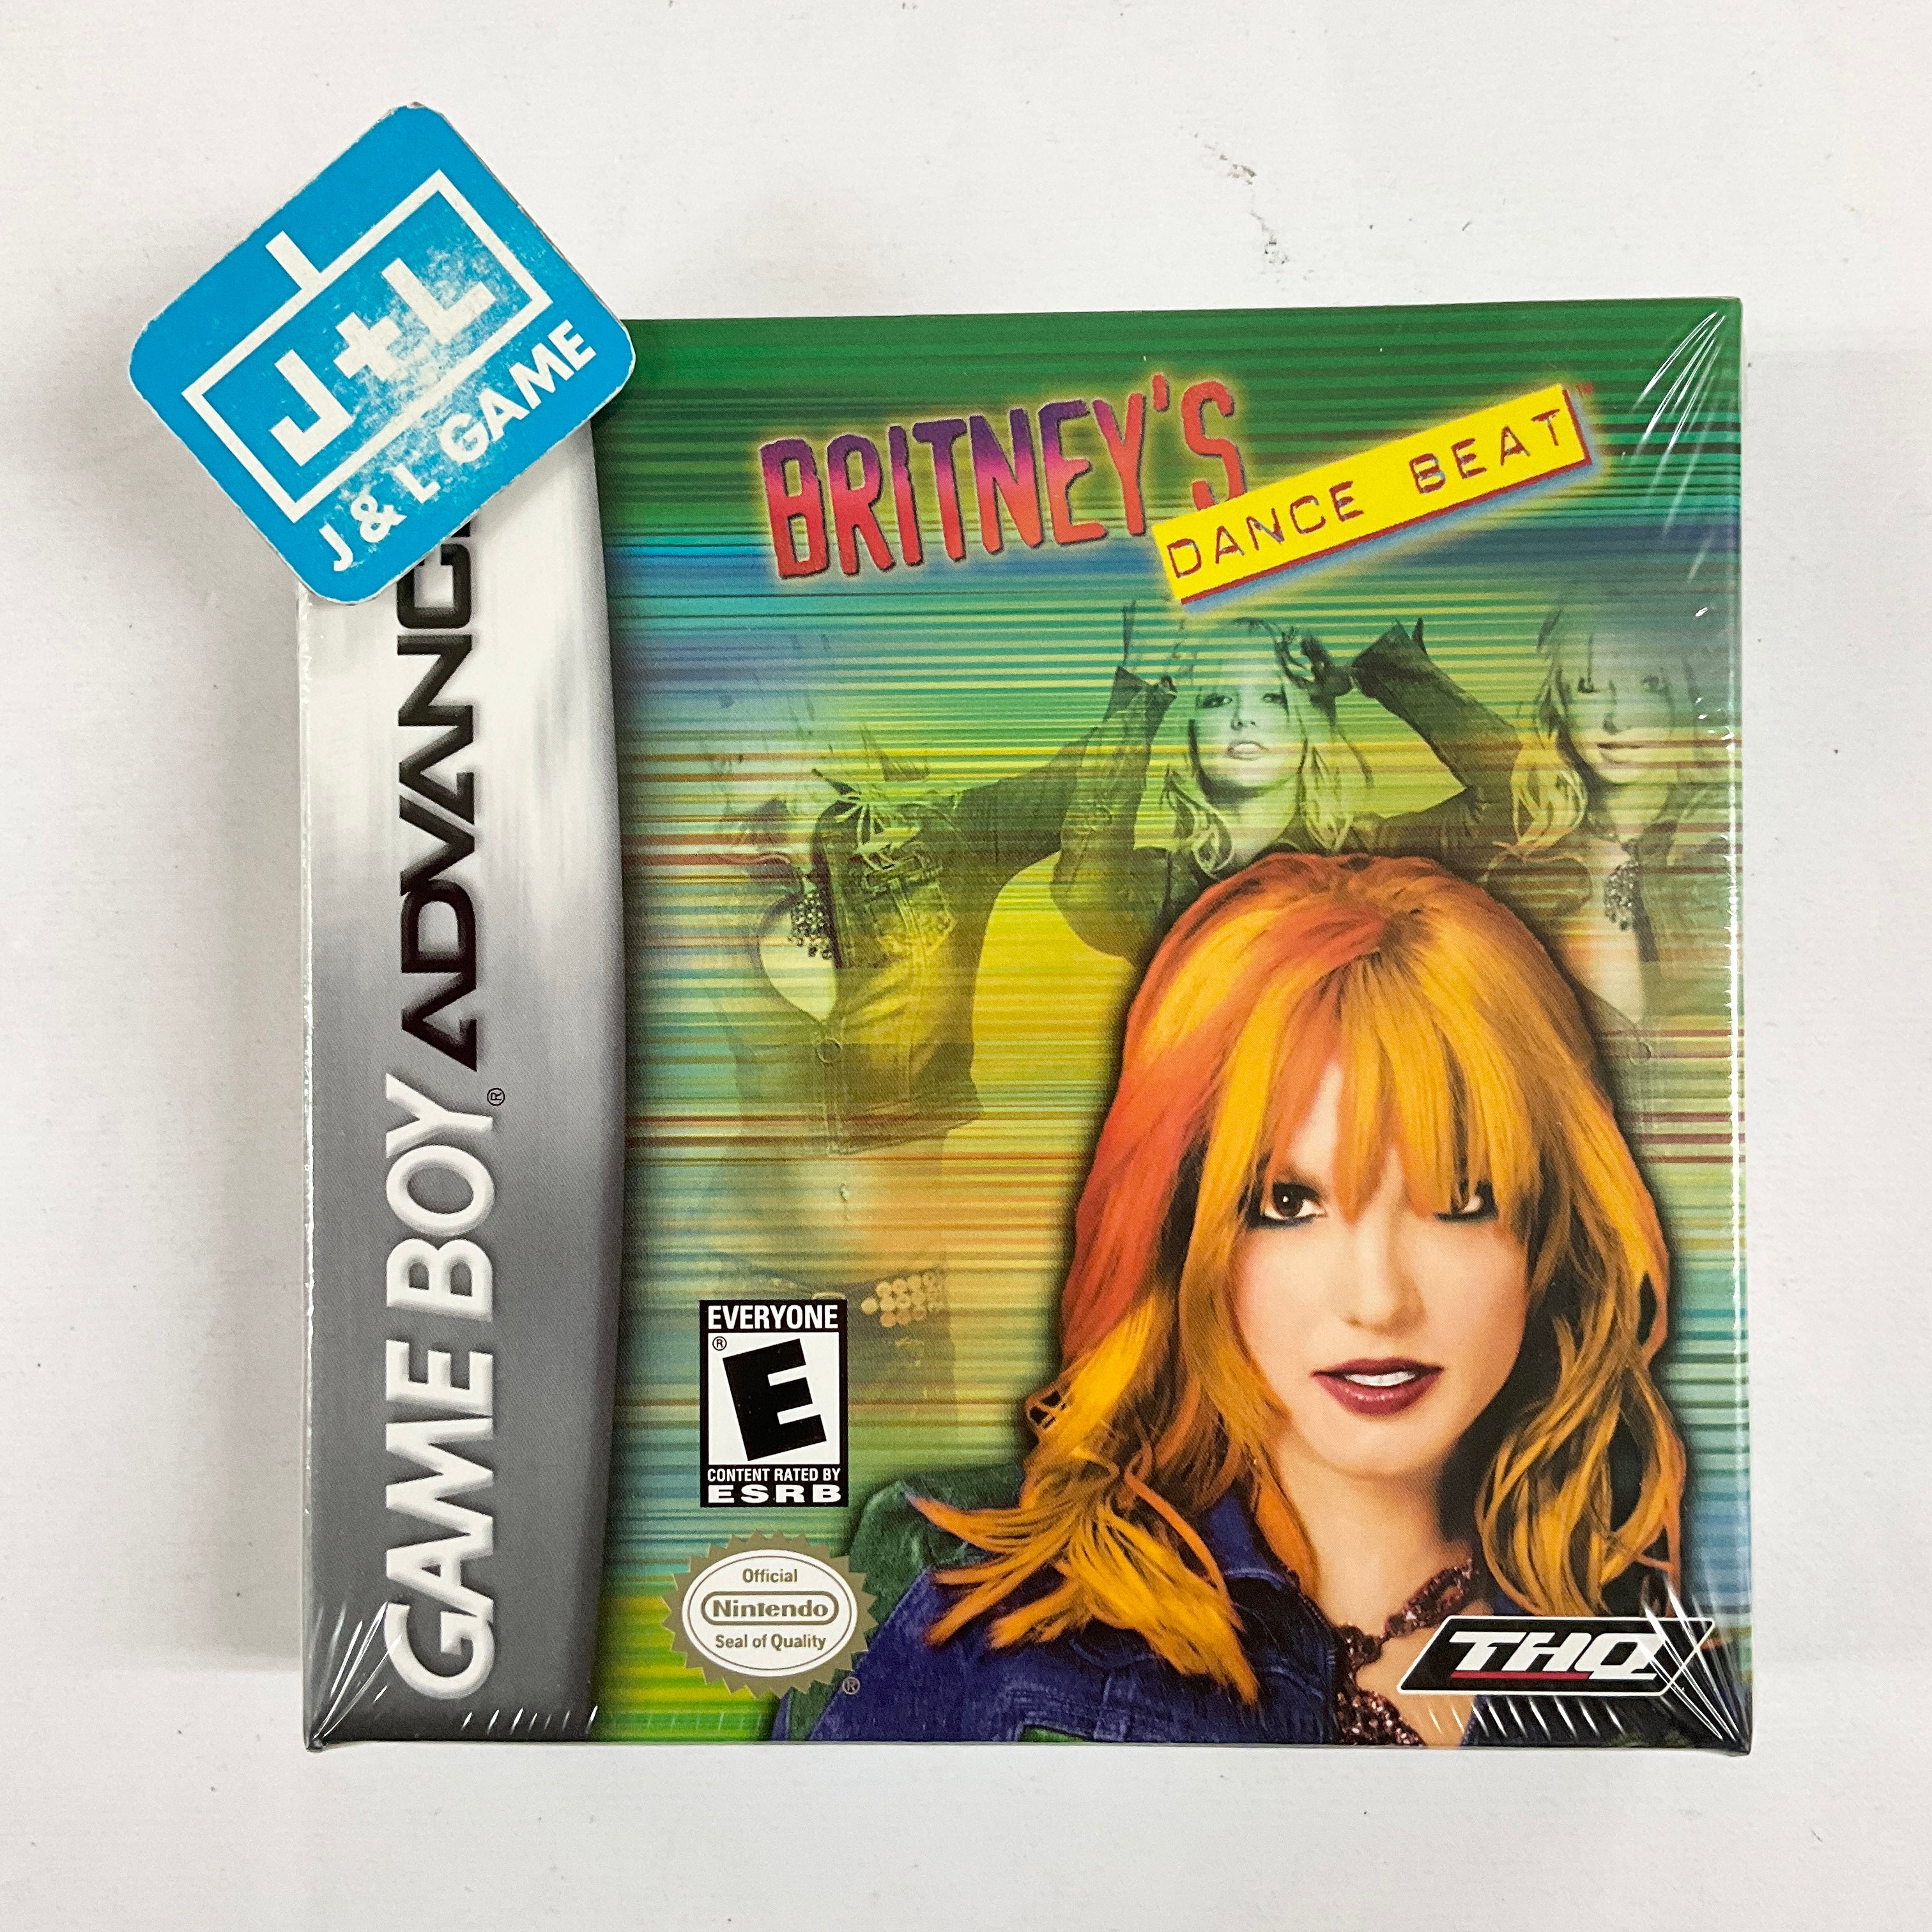 Britney's Dance Beat - (GBA) Game Boy Advance Video Games THQ   